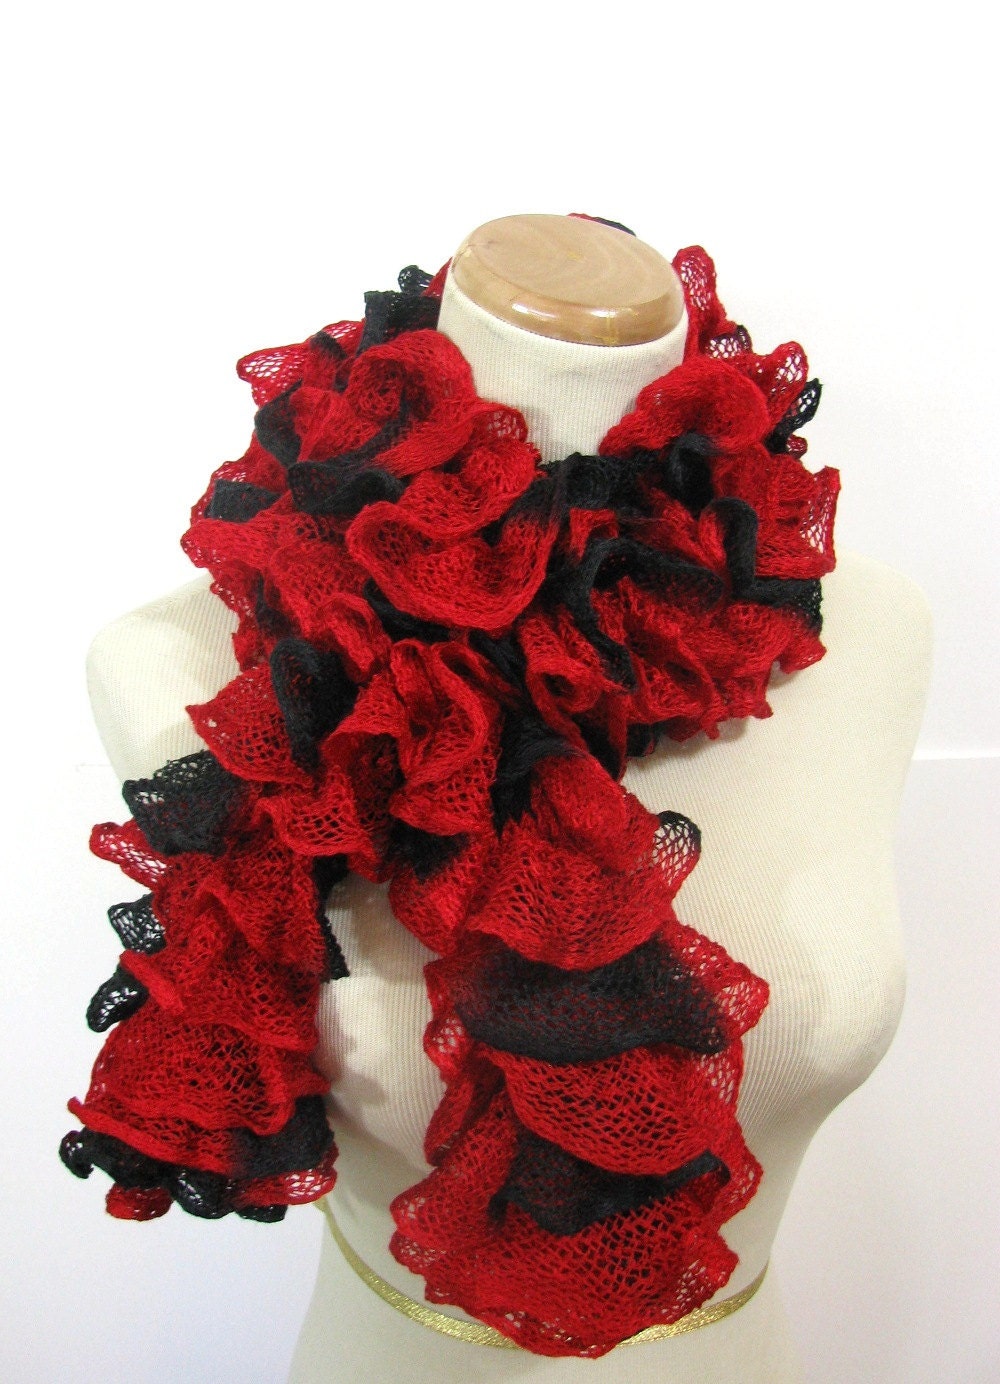 Red and Black Ruffled Scarf - Hand Knit